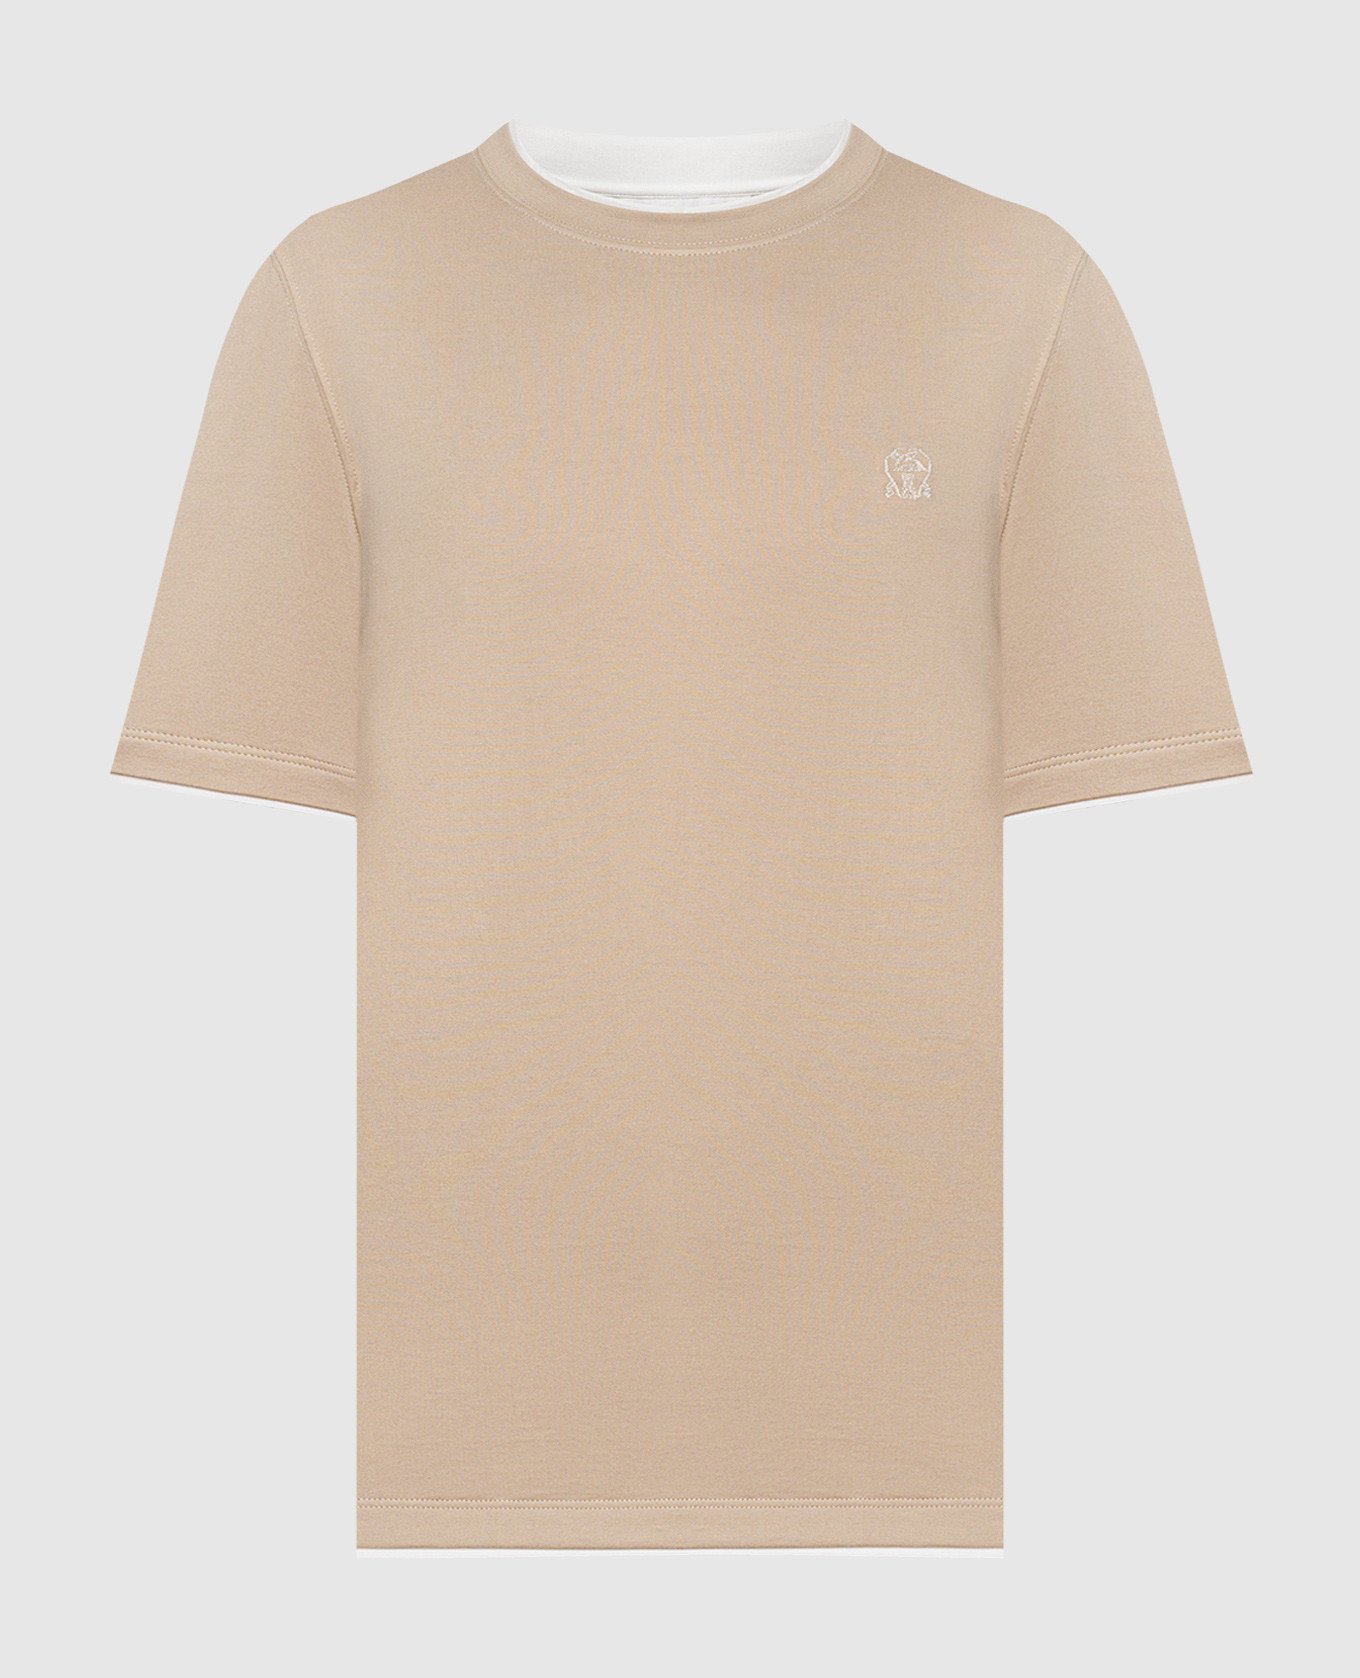 Beige t-shirt with logo emblem embroidery